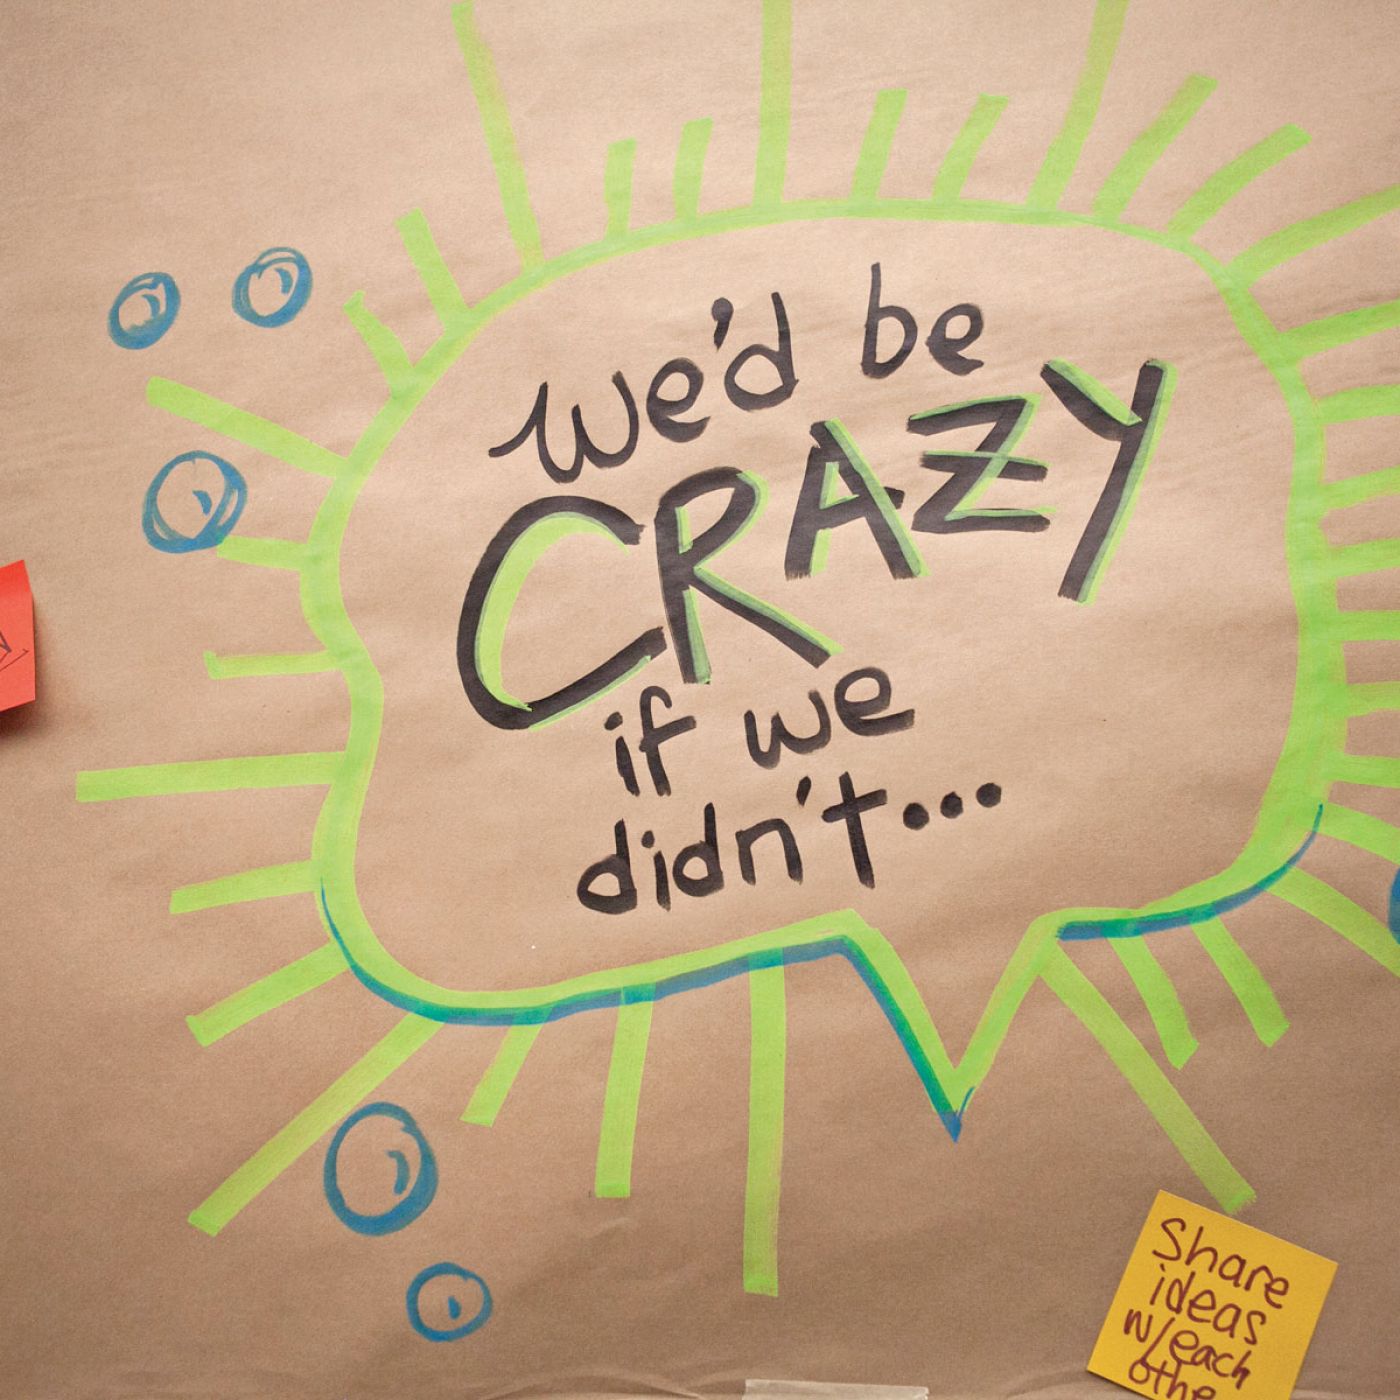 Illustration on brown butcher paper with colorful post-it notes that says "We'd be crazy i we didn't..."